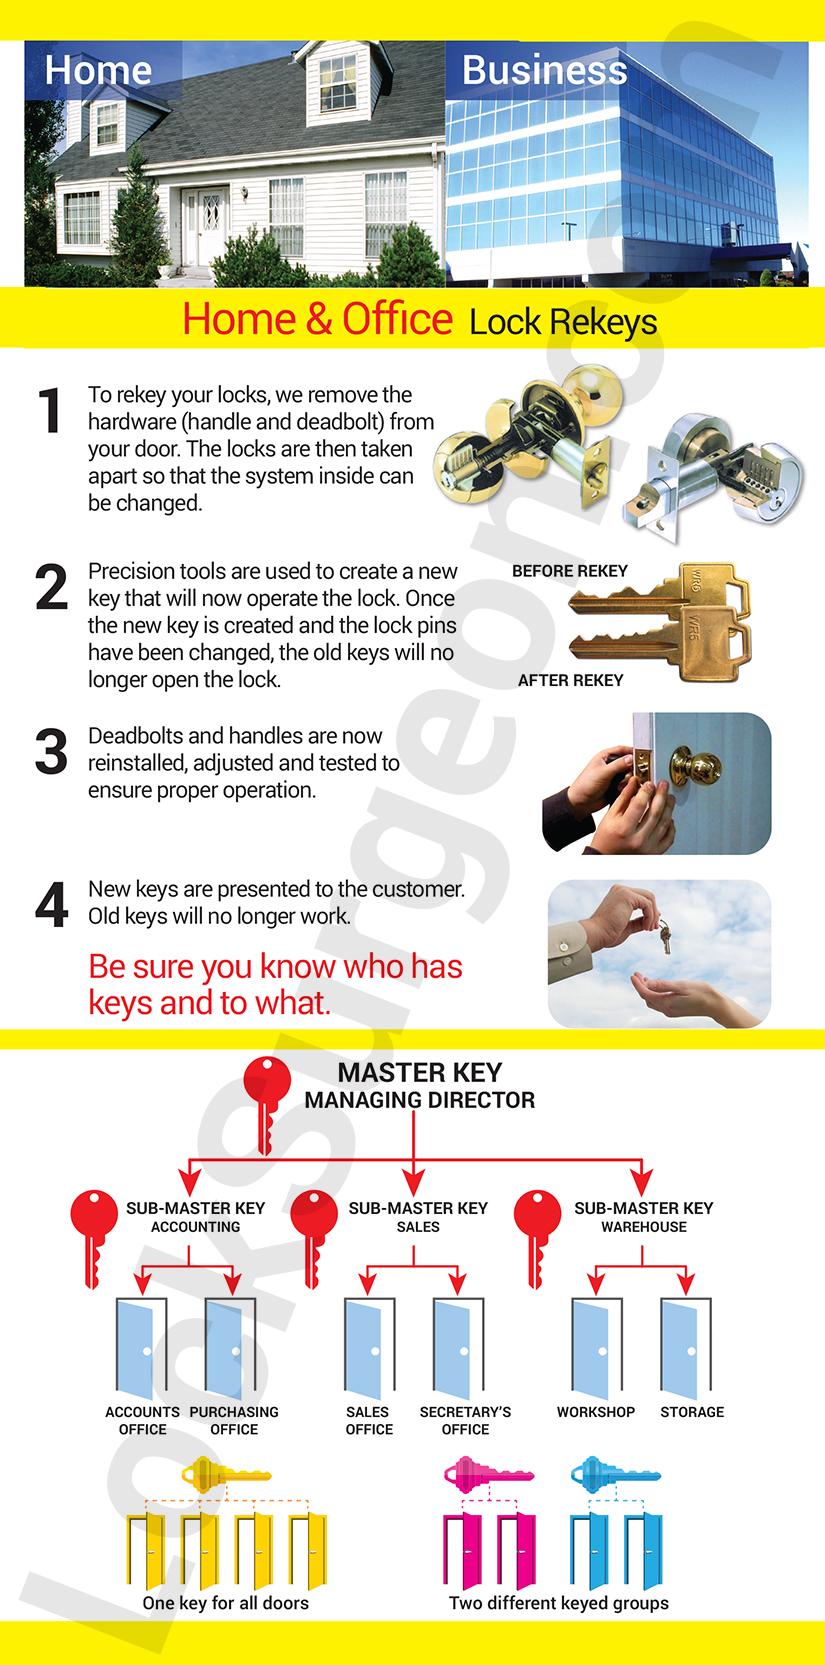 Lock Surgeon in-store advice and assistance for home or business lock rekeys & master key systems.